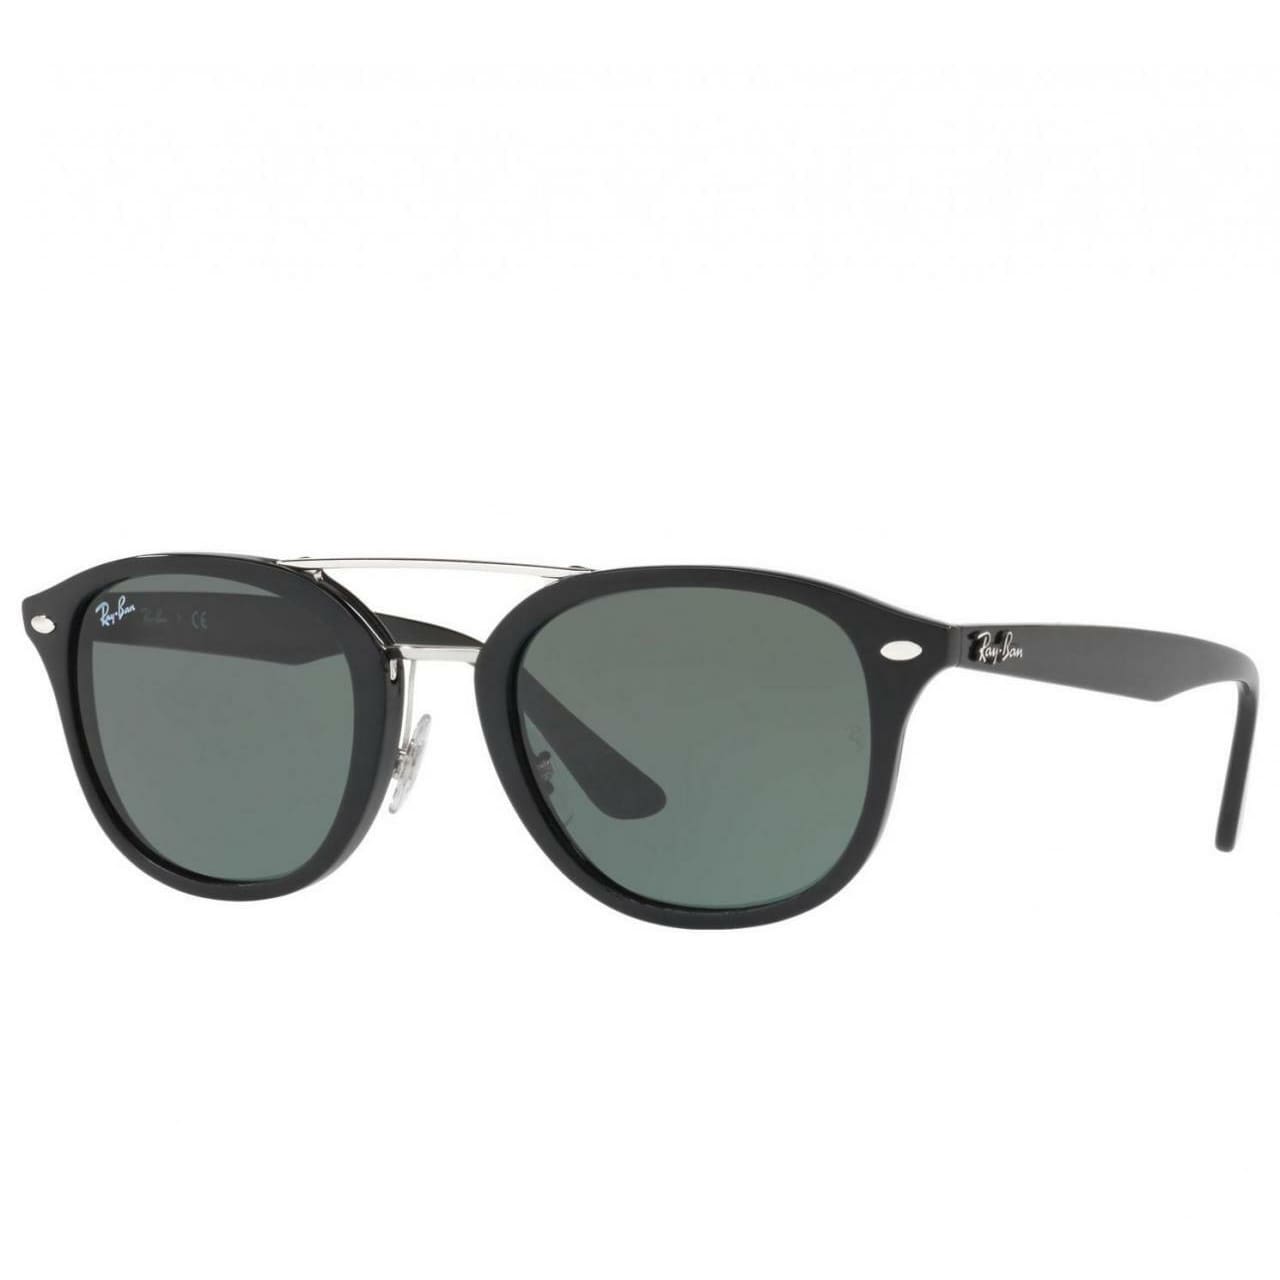 Ray-Ban RB2183 901/71 Green Classic Lenses with Black Square Sunglasses Frames 8053672741339